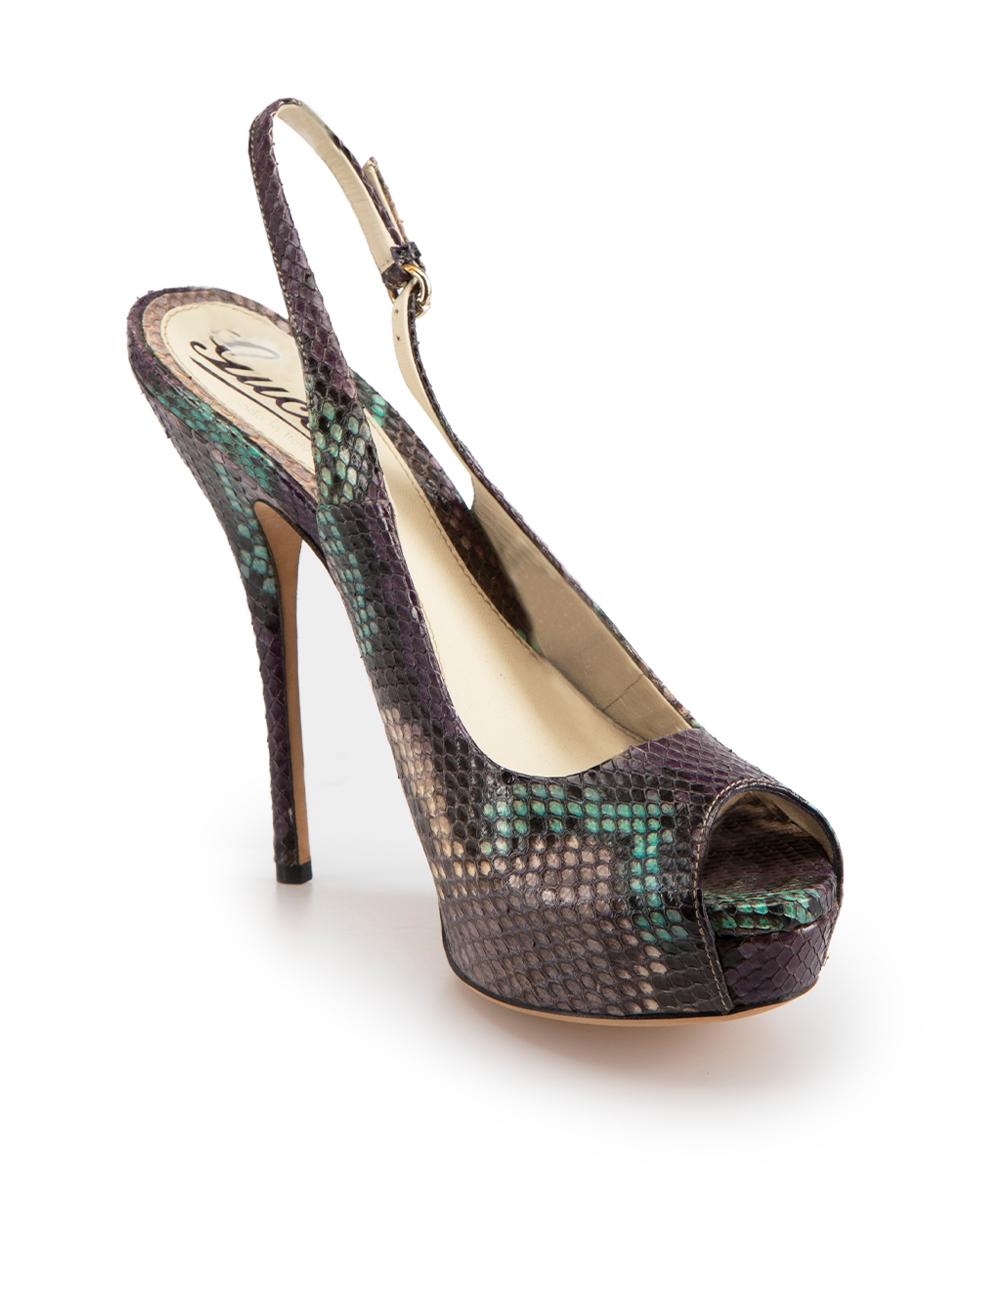 CONDITION is Very good. Hardly any visible wear to heels is evident on this used Gucci designer resale item. Dustbag included.



Details


Multicolour

Snakeskin

High heels

Peep-toe

Adjustable slingback strap

Platform



 

Made in